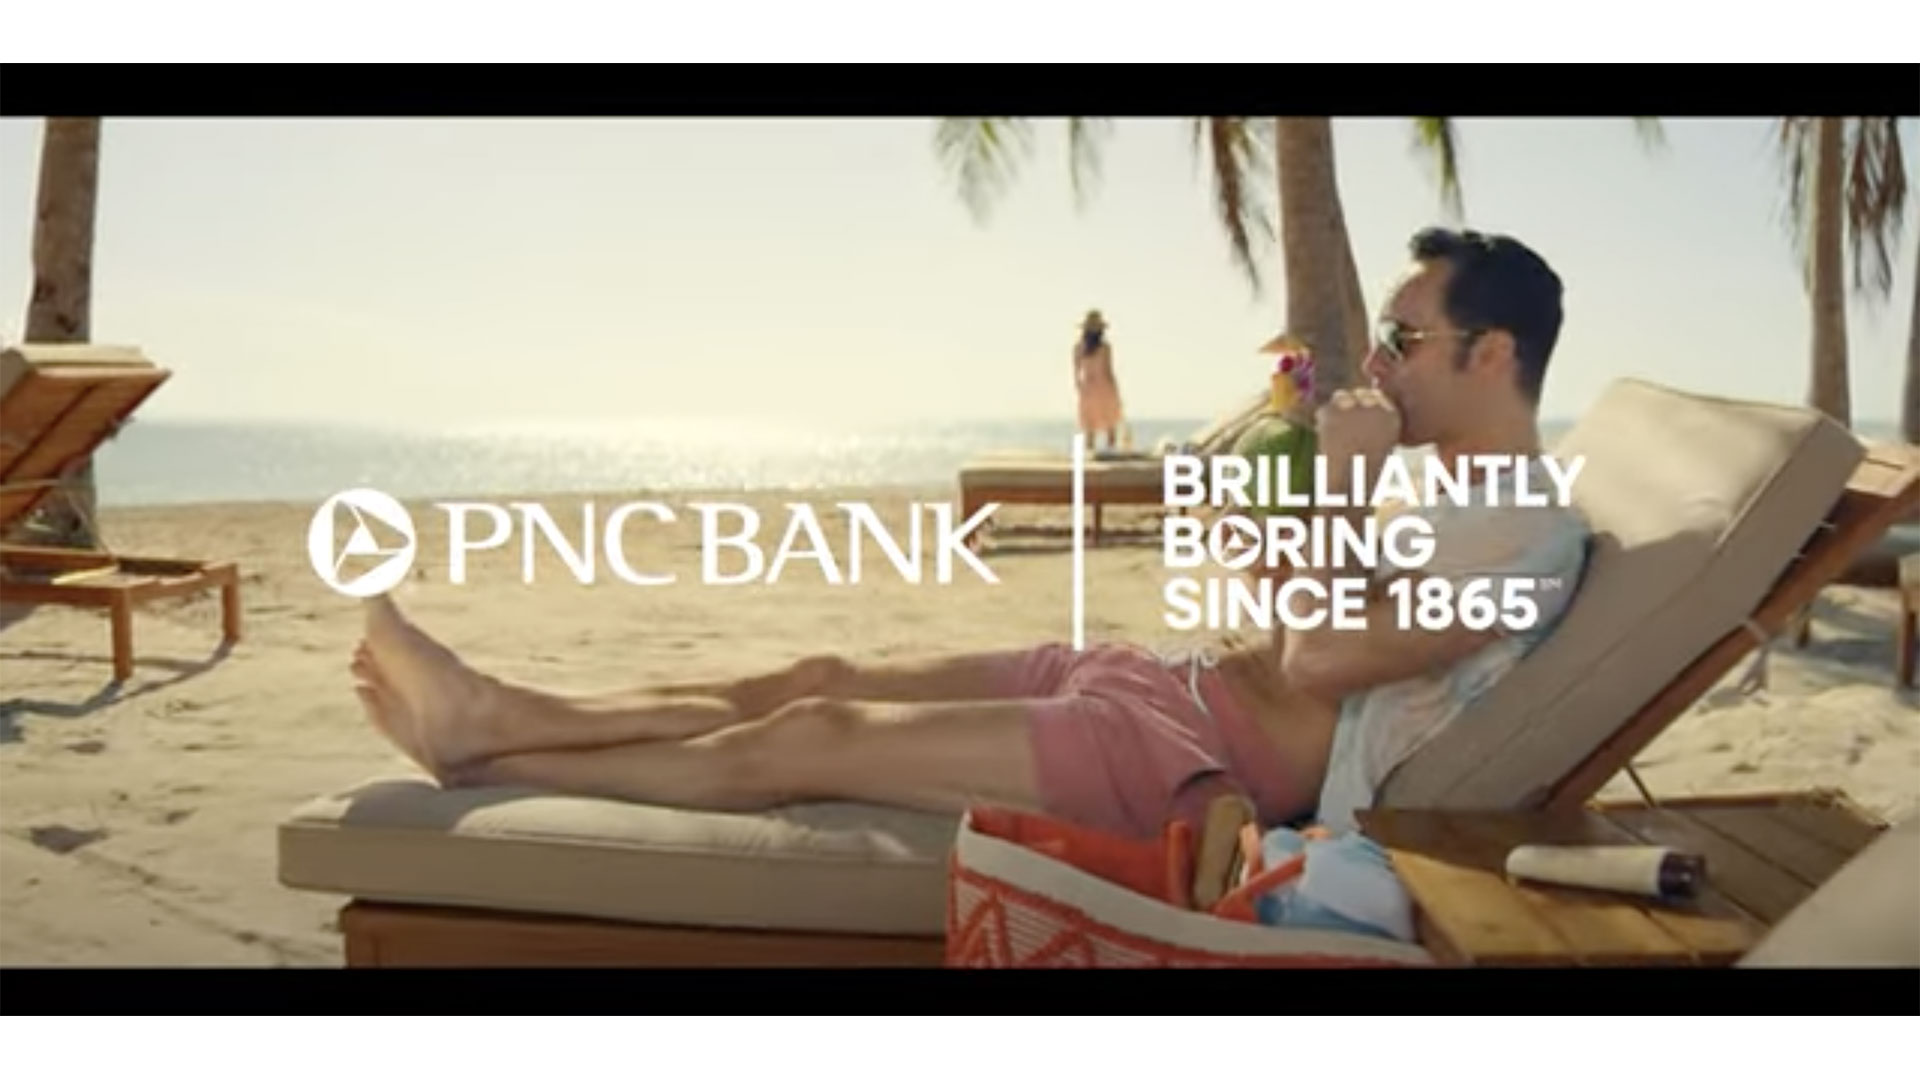 PNC Bank, Brilliantly Boring Since 